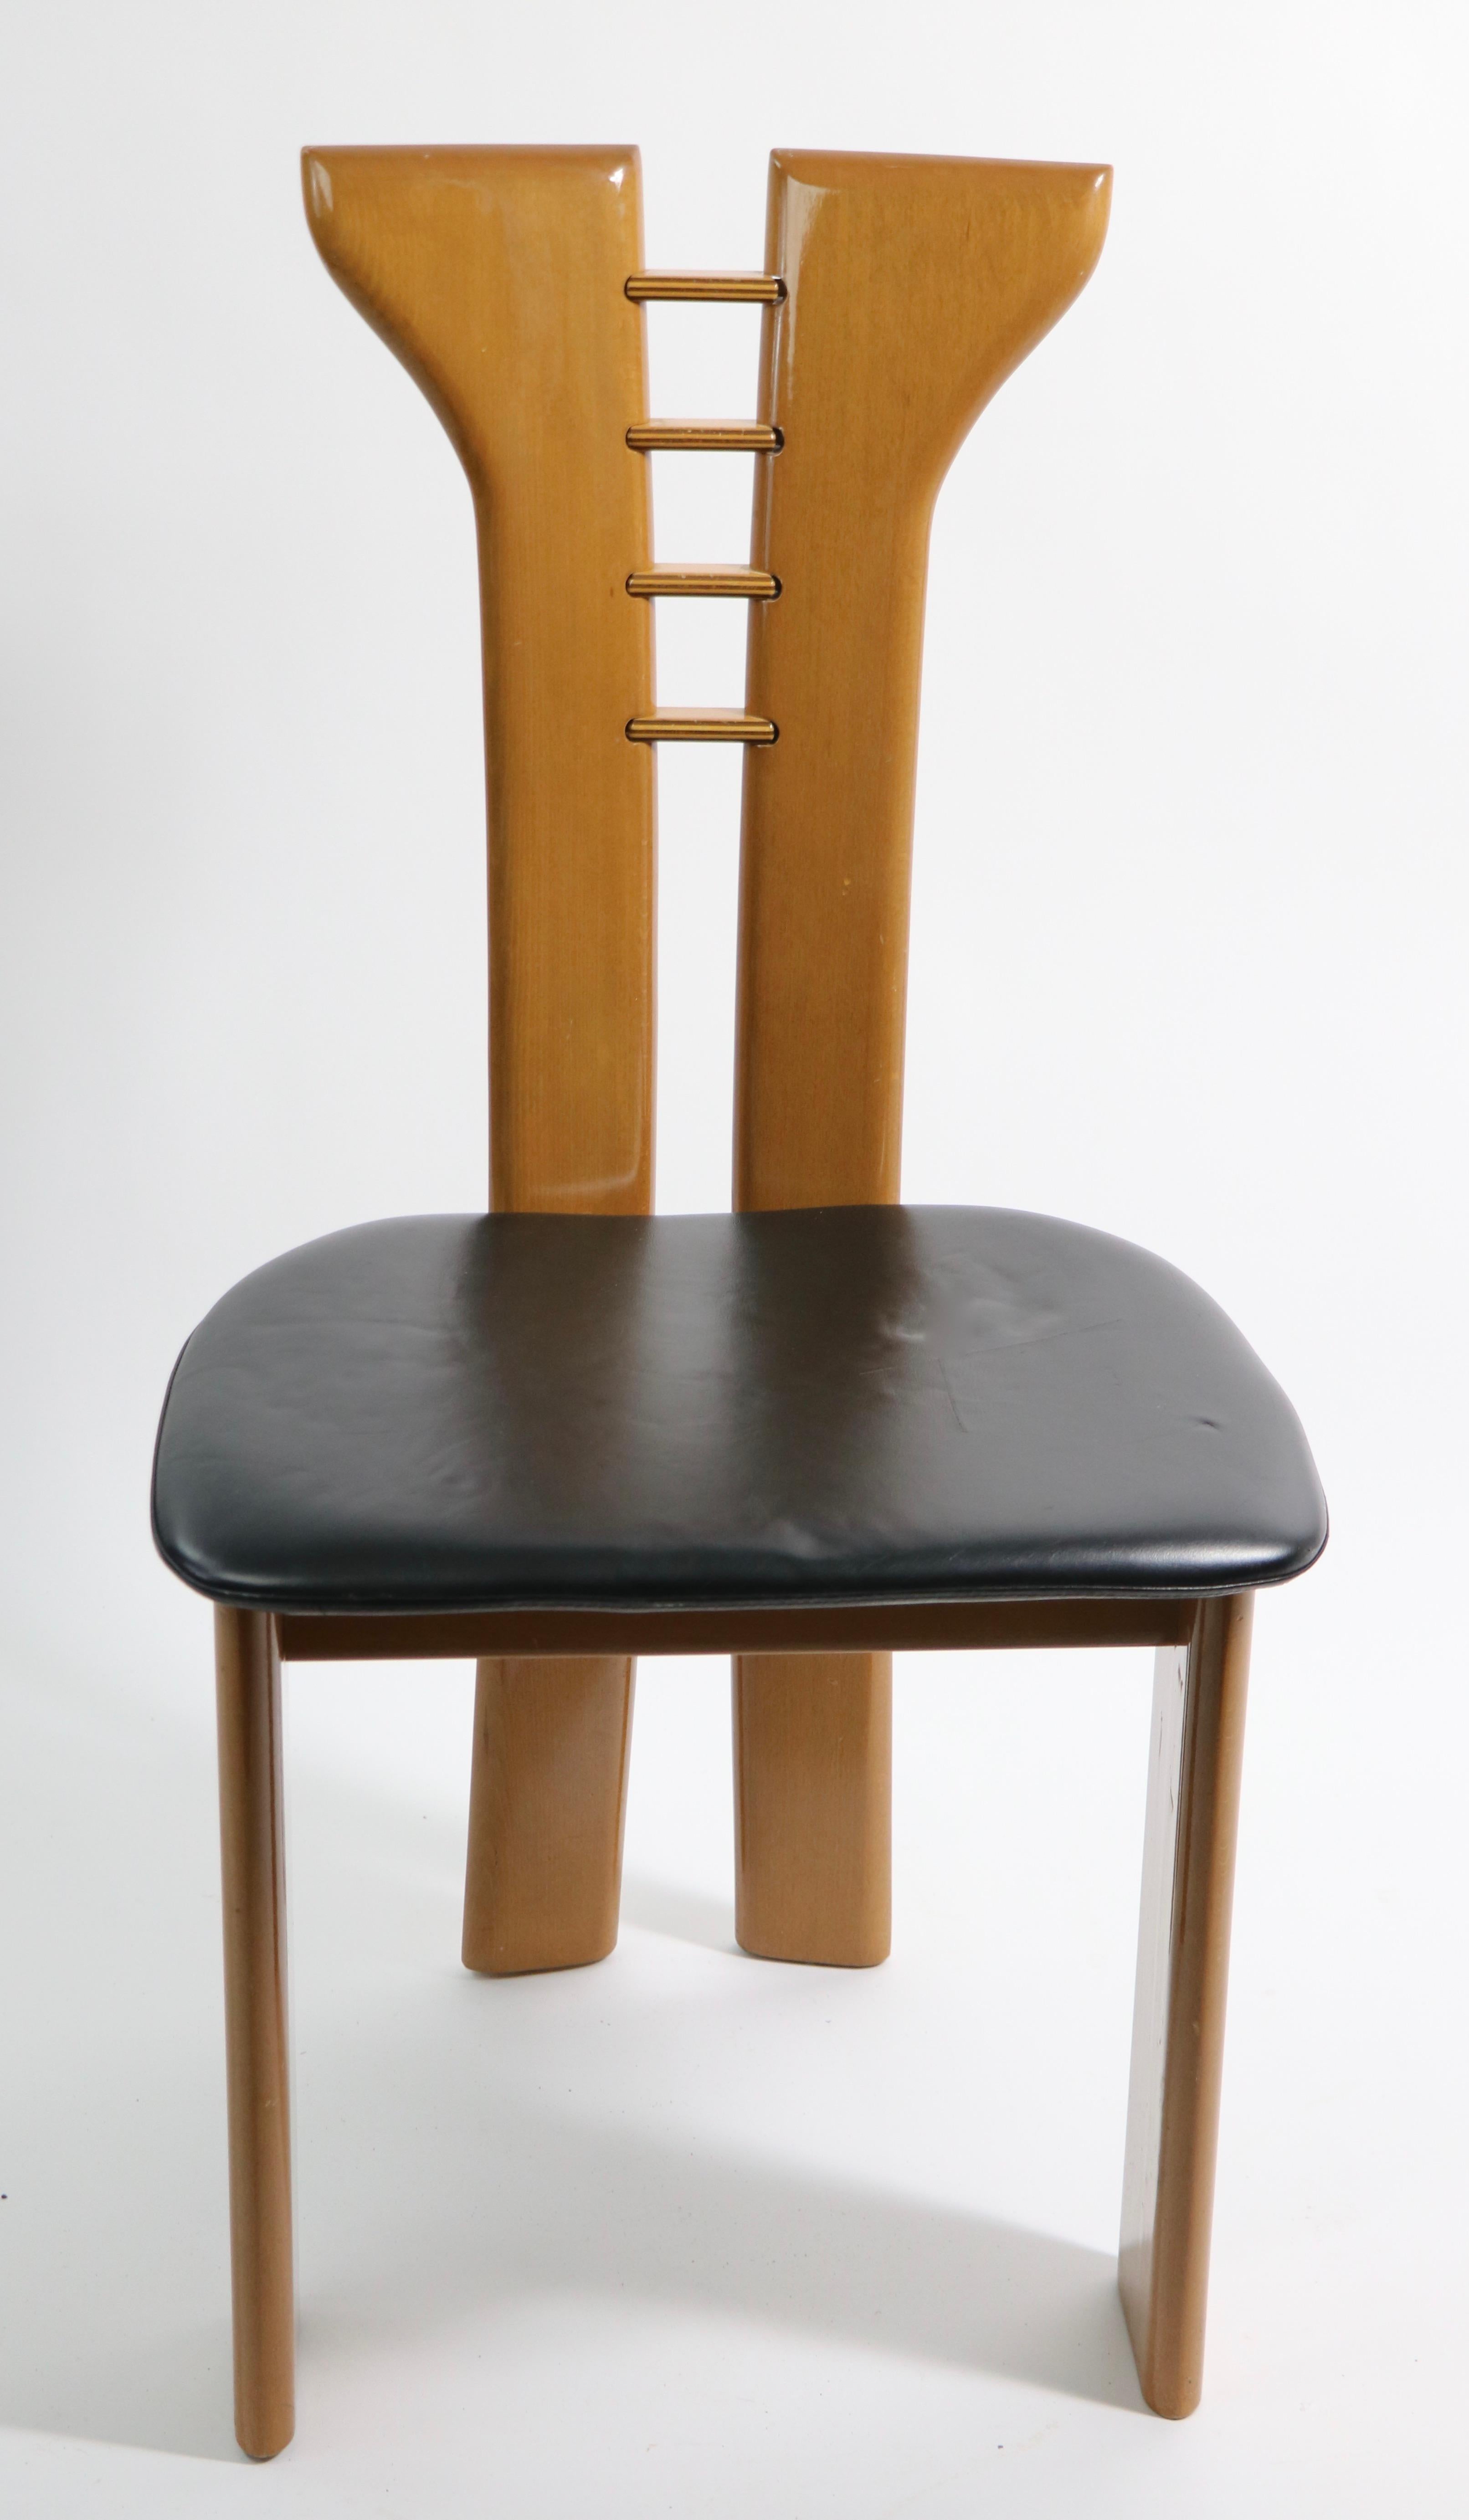 Chic high style post modern side, or dining chair, often attributed to Pierre Cardin, we believe it is actually Maurice Villency. This example is in very good, original estate condition, the leather seat shows minor cosmetic wear (see images) normal